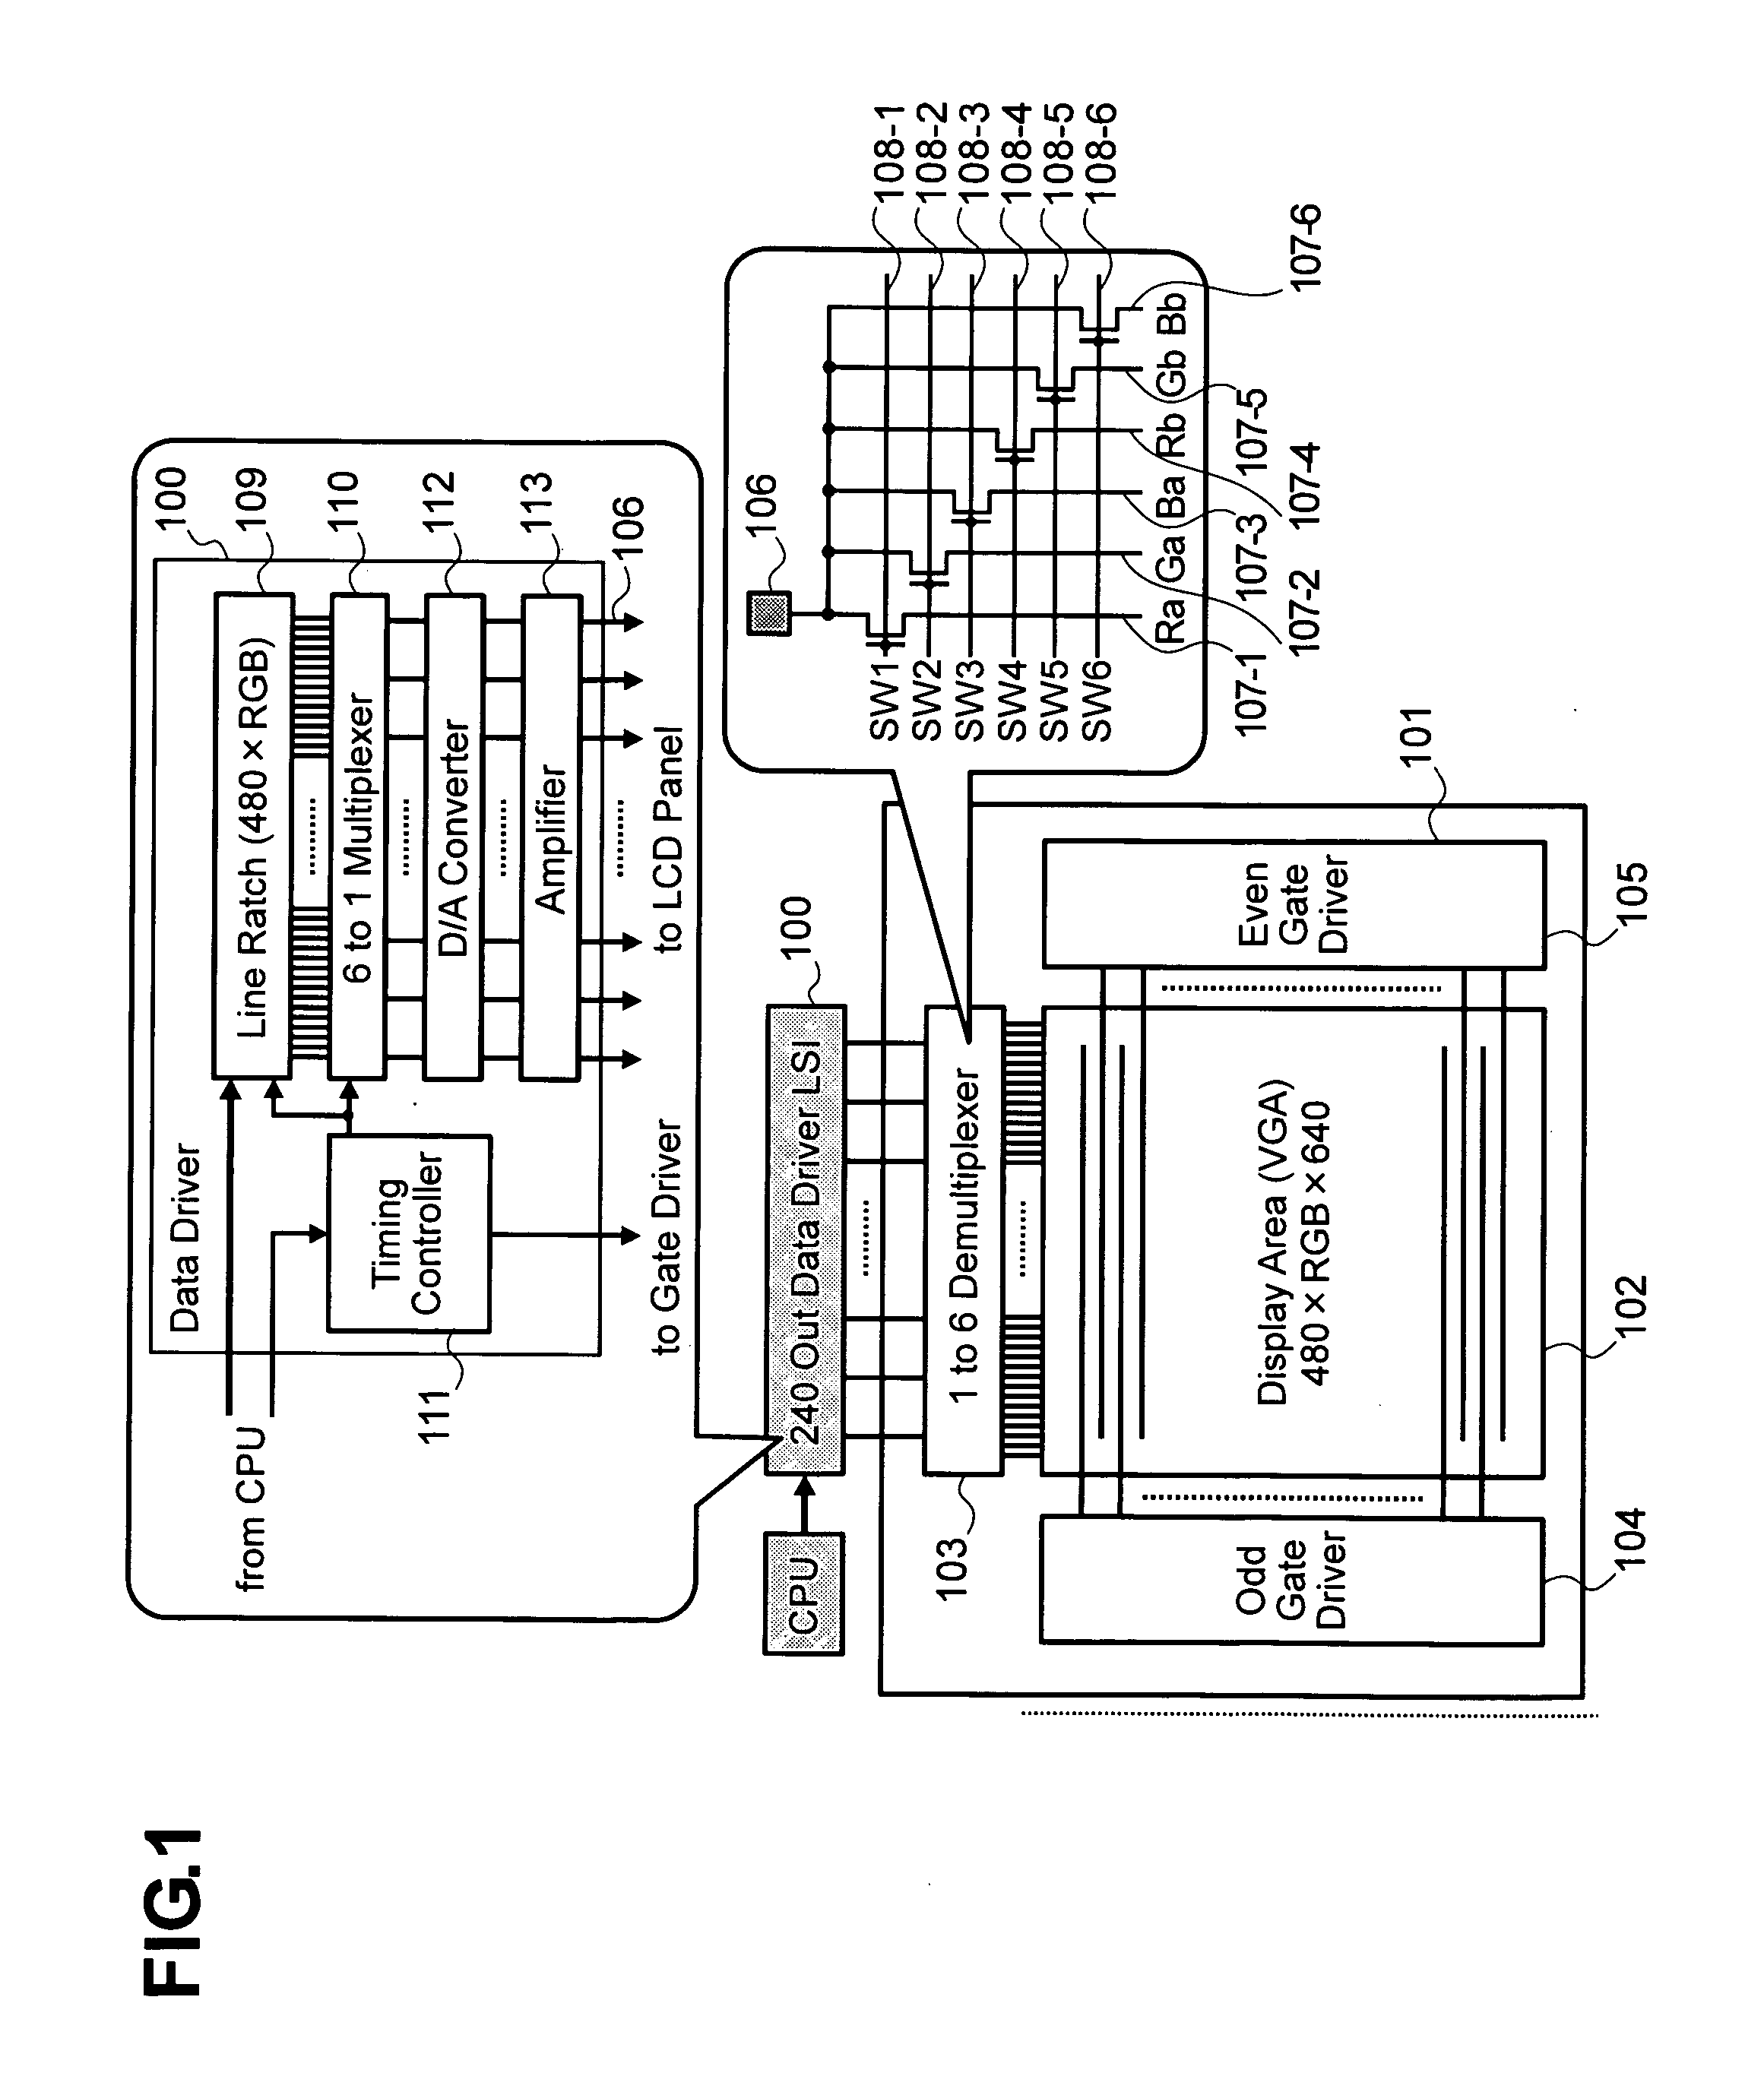 Display device and method for driving a display device